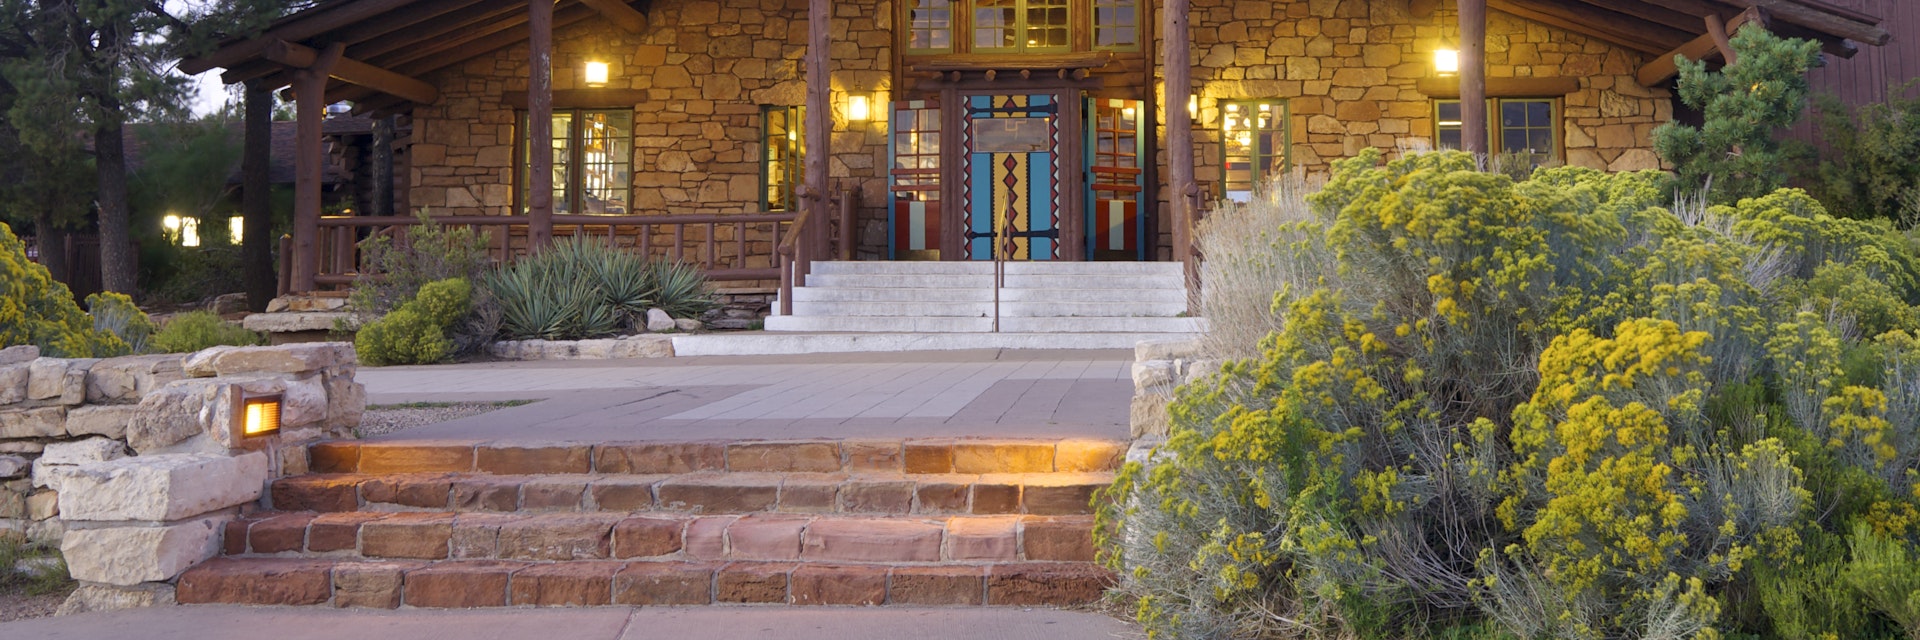 GRAND CANYON, USA - AUGUST 30: Lodge on August 30, 2007 in Grand Canyon: Entrance to the Bright Angel Lodge. Designed in 1935, the Lodge is a neuralgic point of activity in the South Rim.